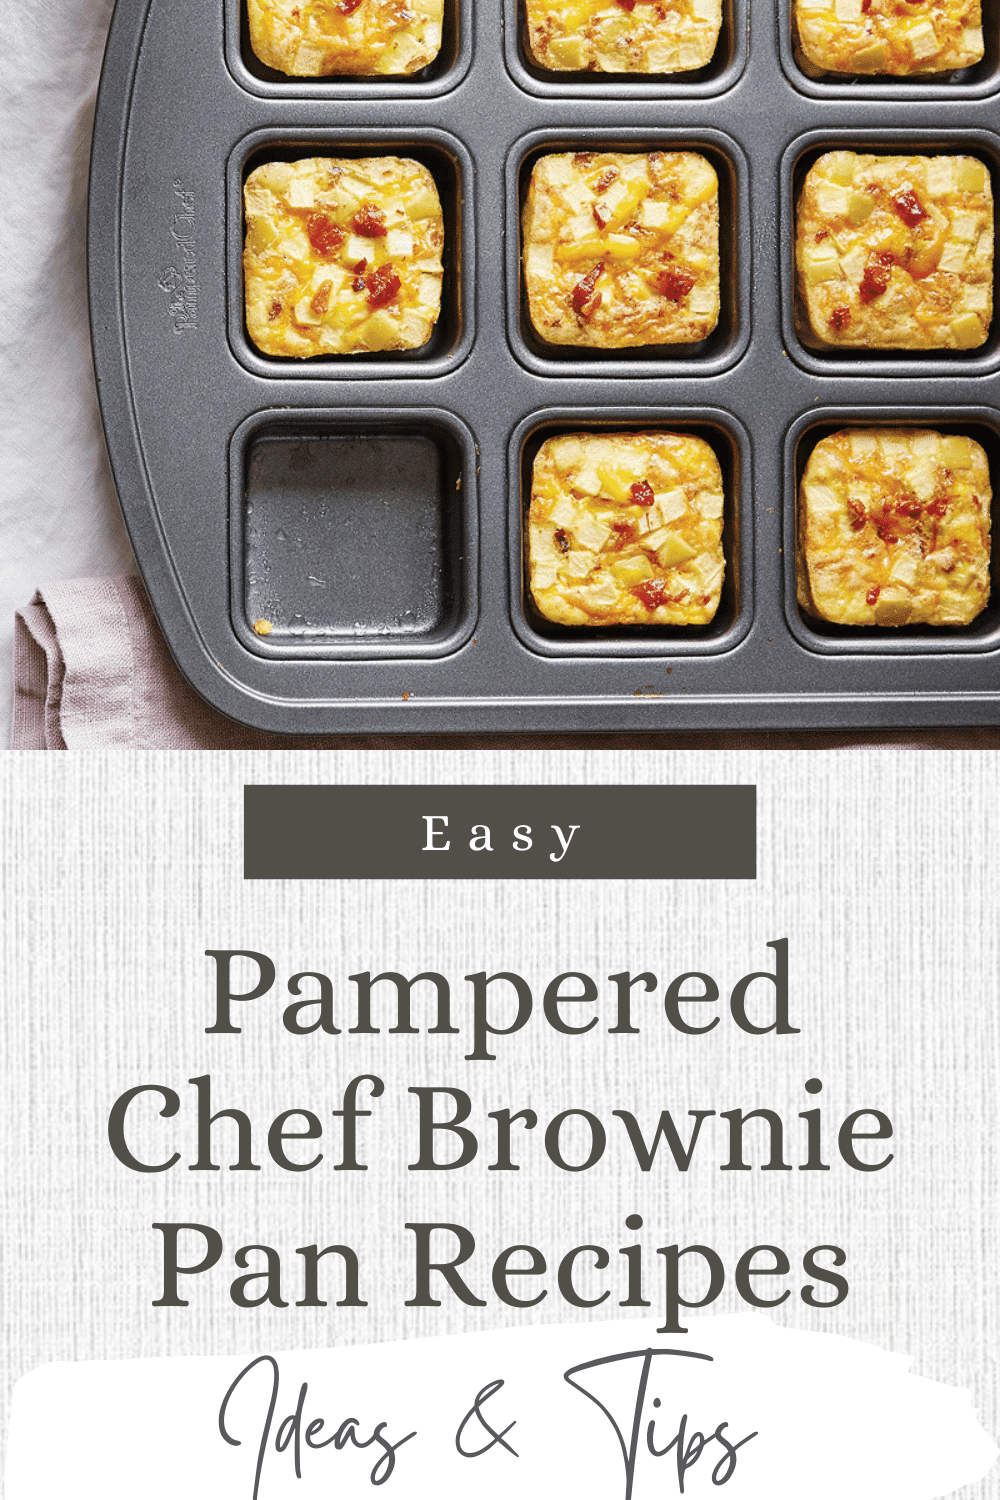 Easy Pampered Chef Brownie Pan Recipes